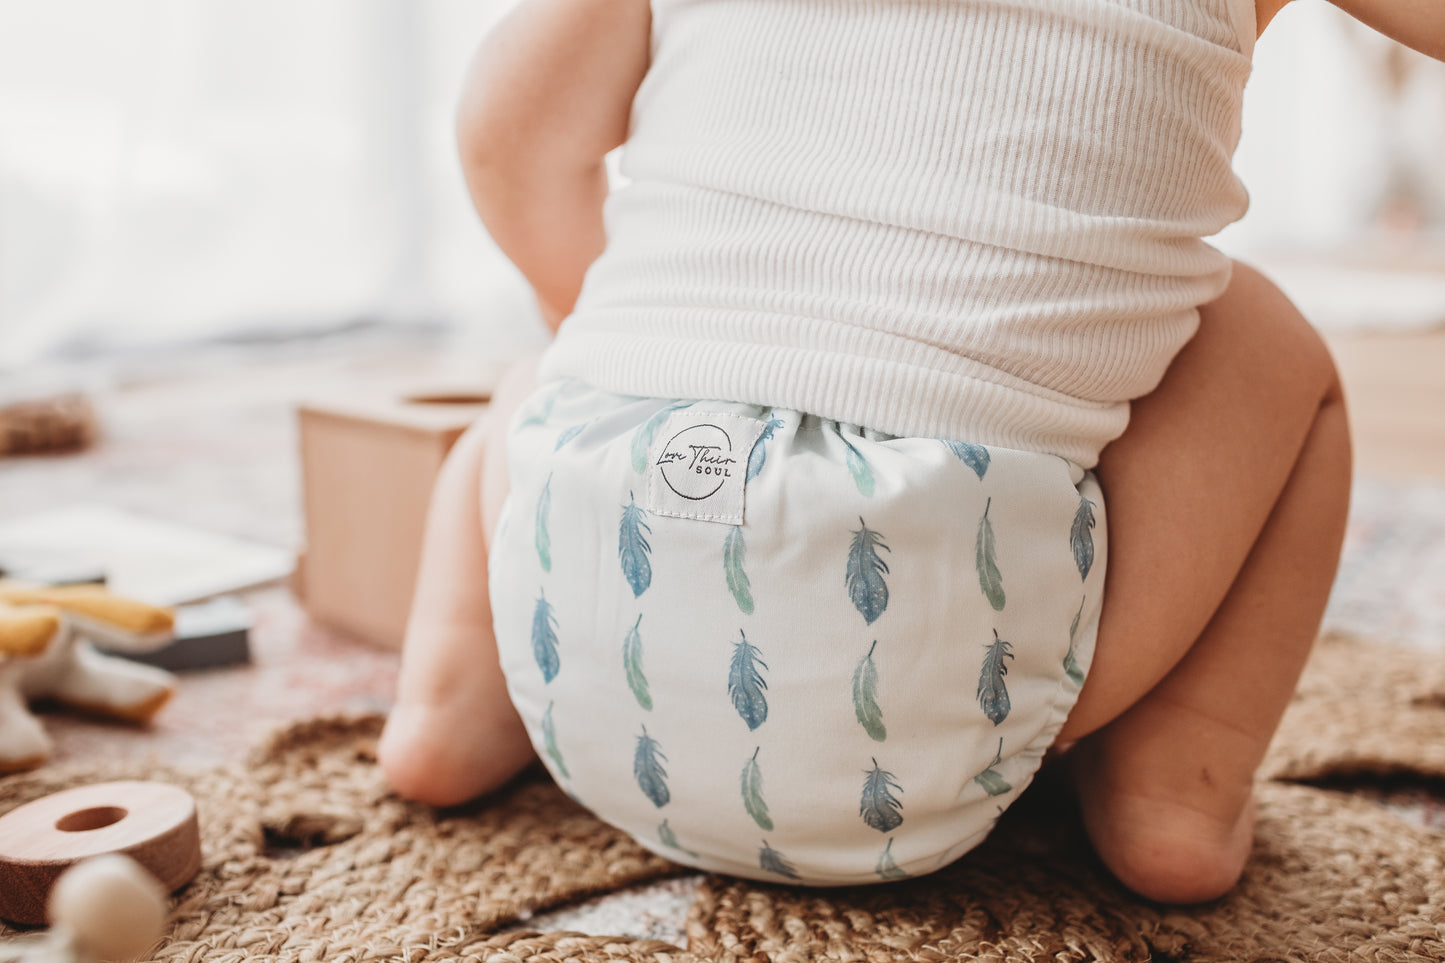 Nestling Reusable Nappies Love Their Soul